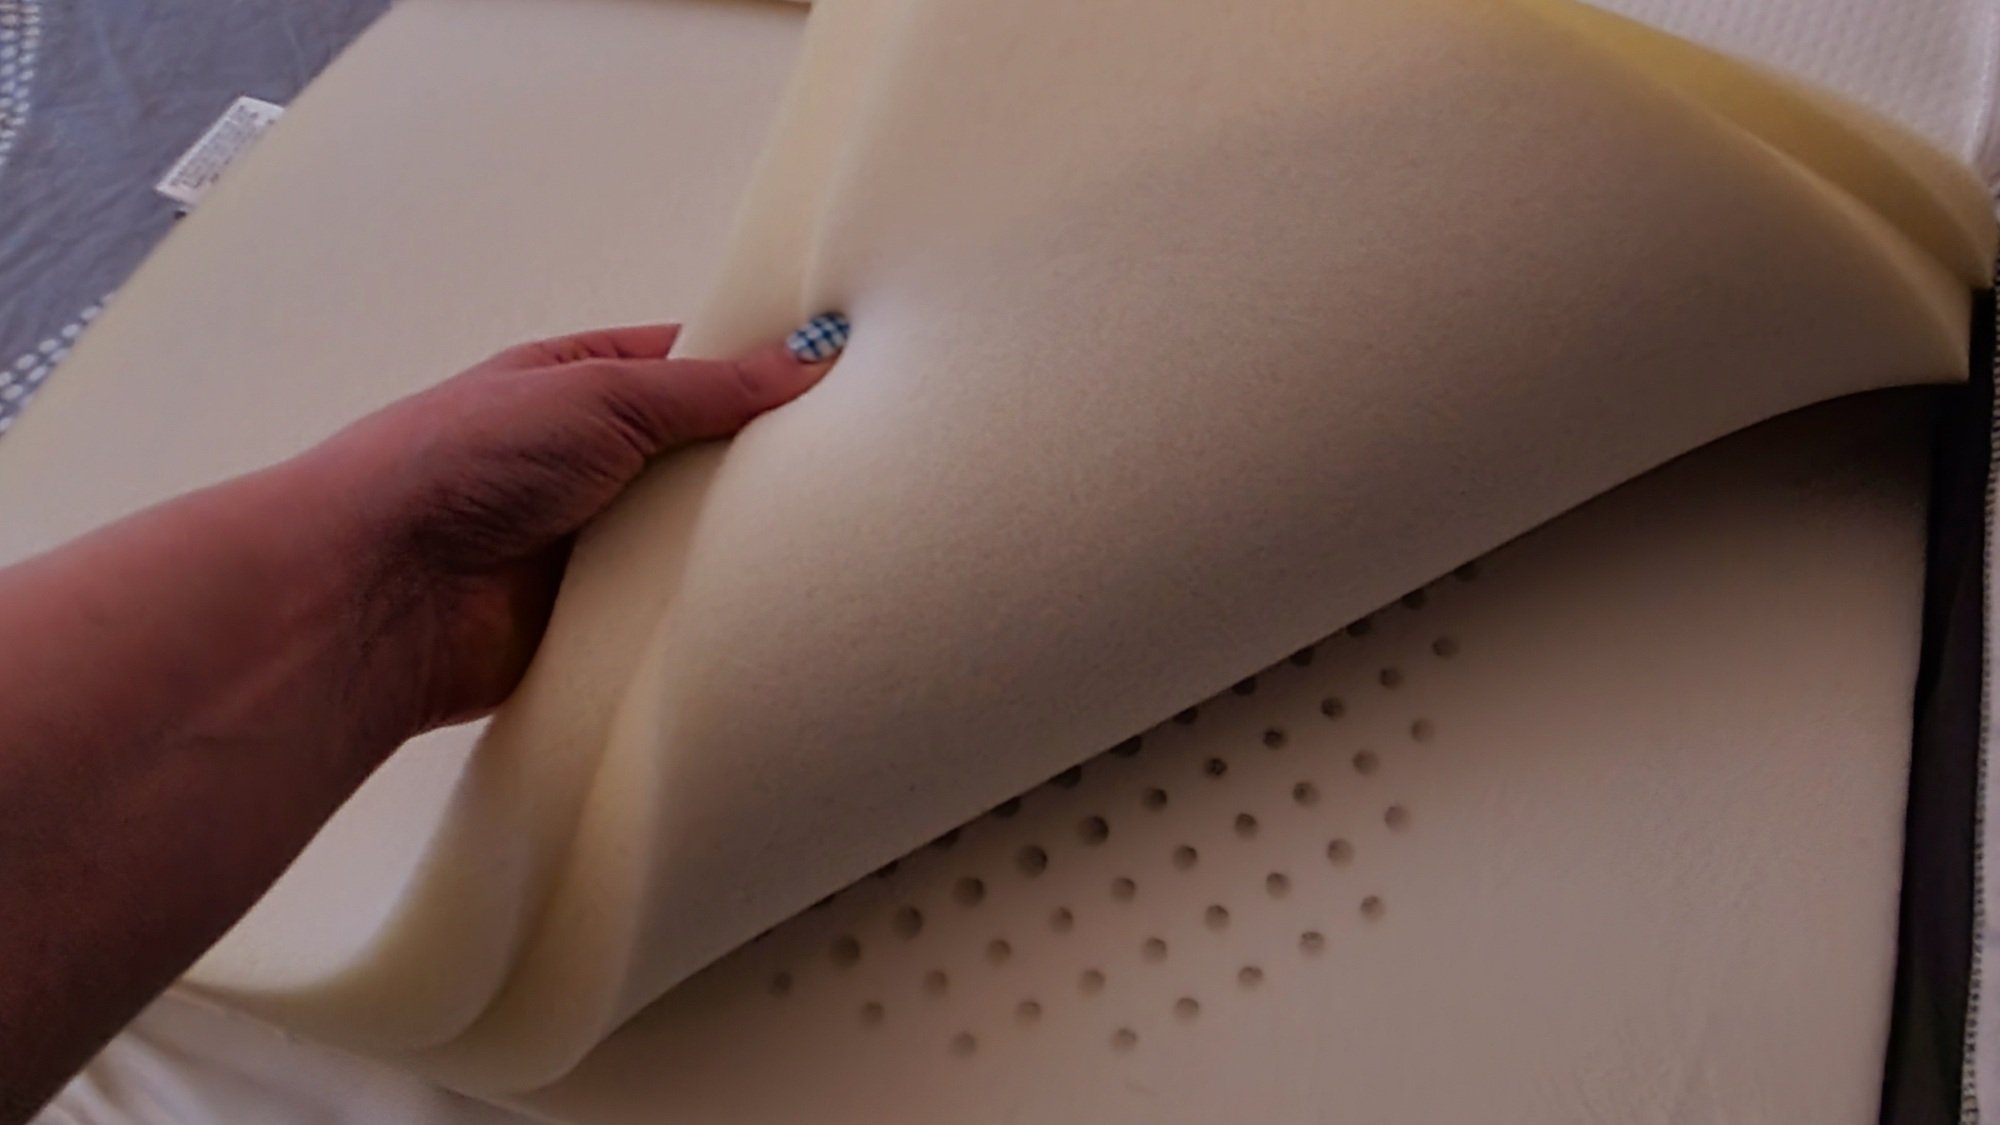 hand pulling back two foam layers of a pillow